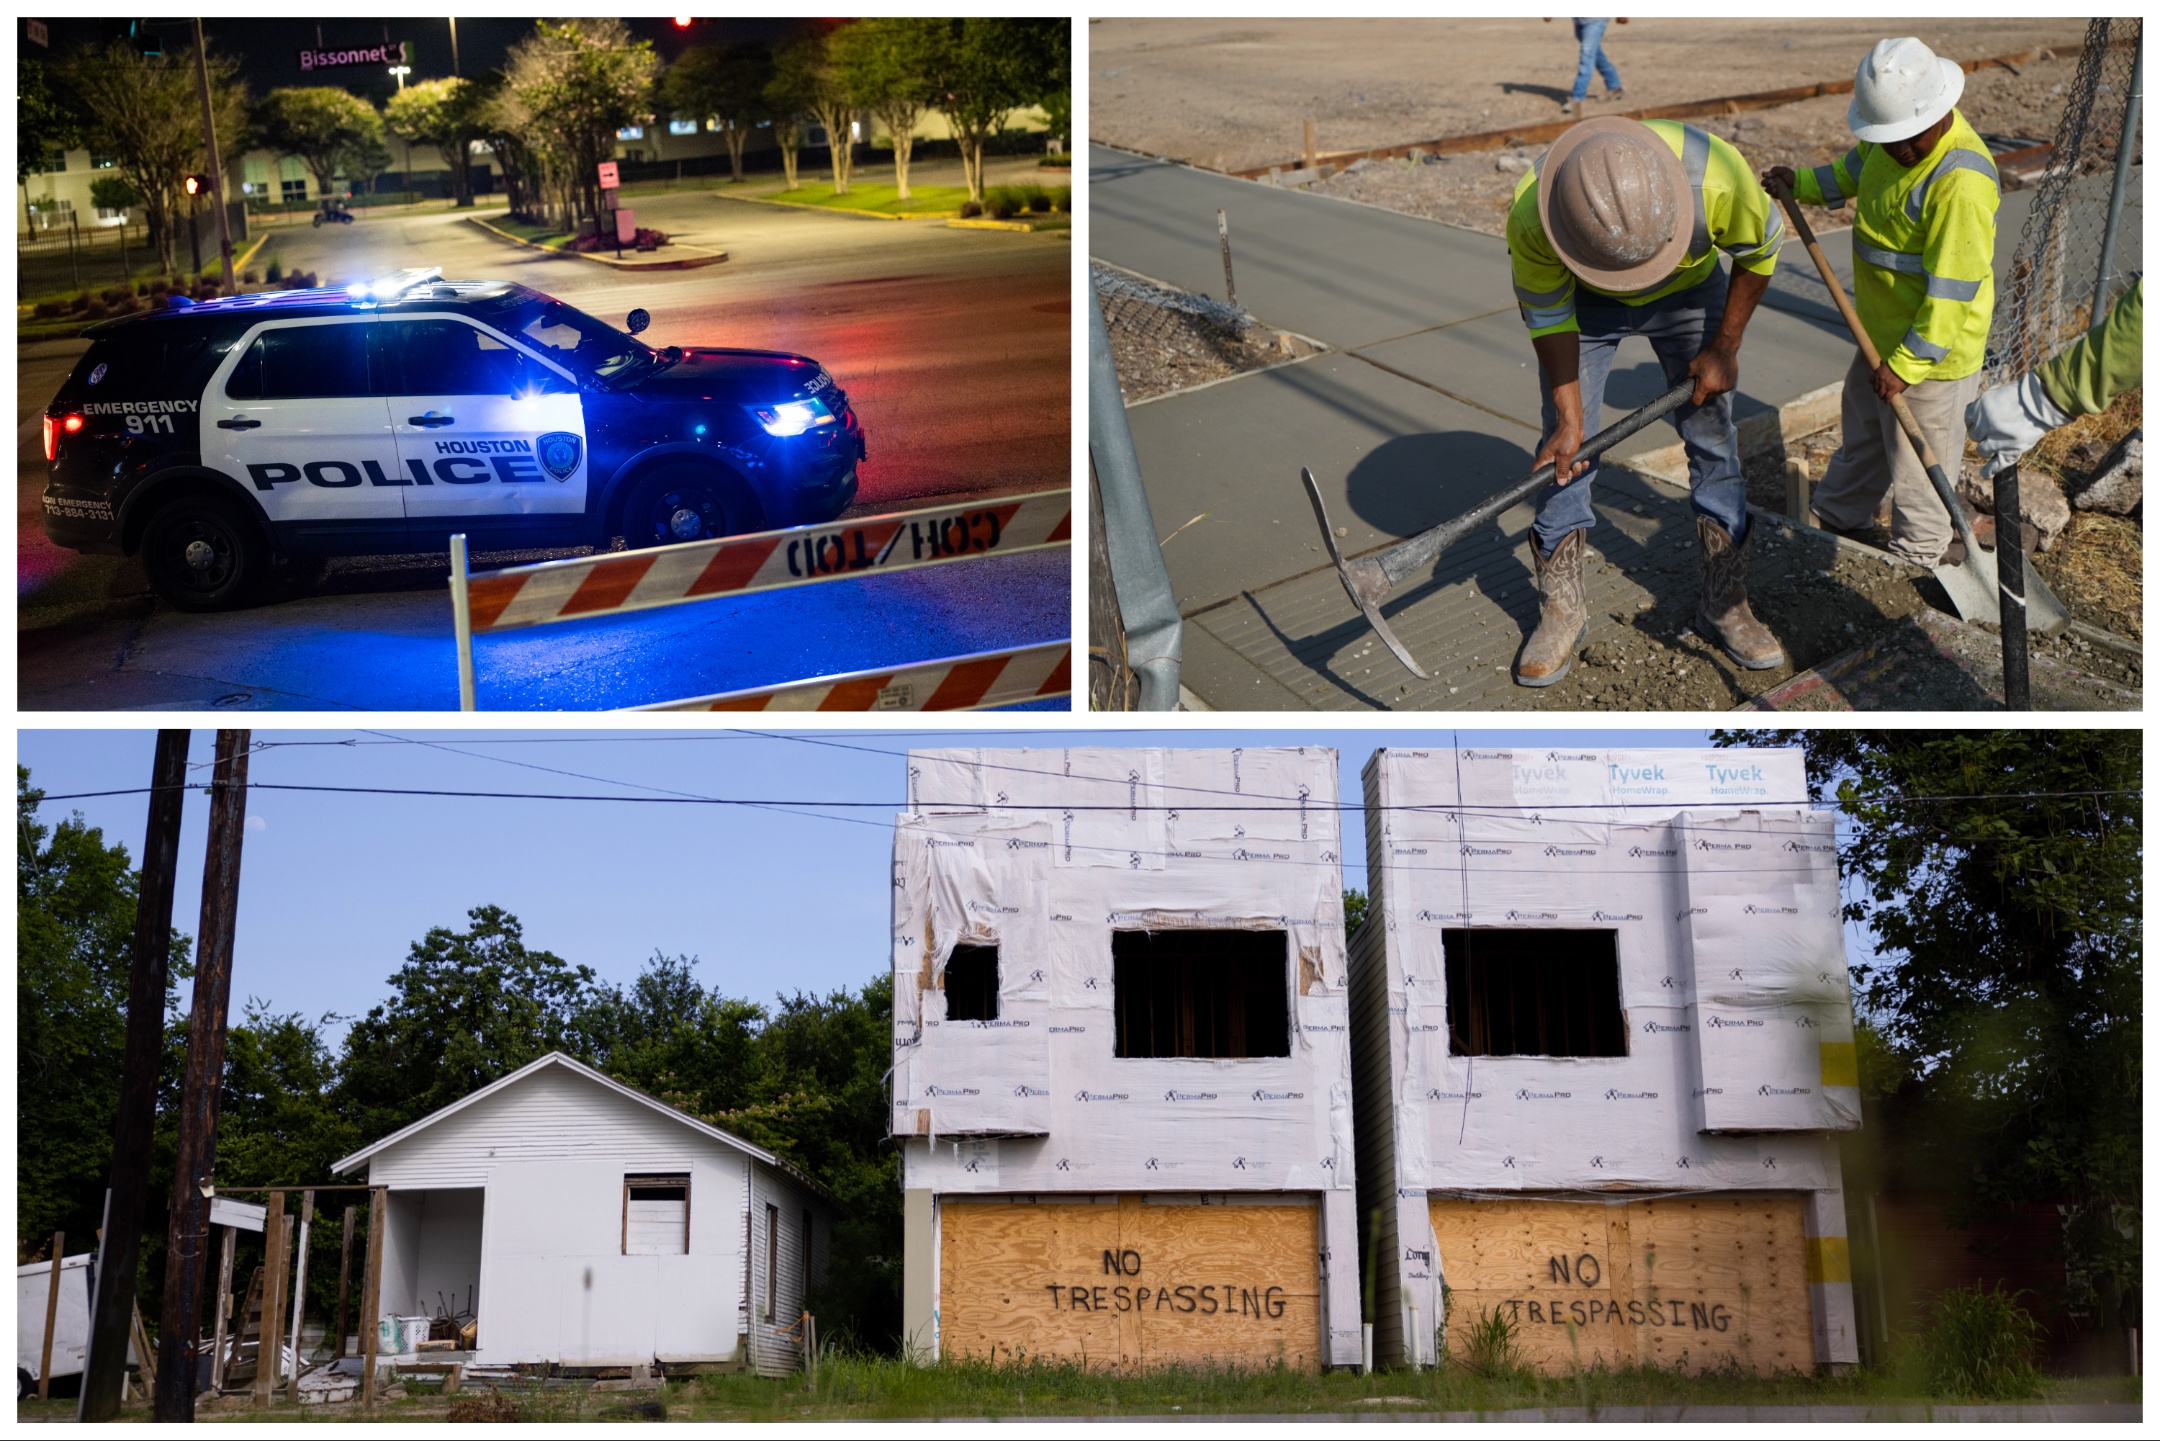 A Houston police cruiser, city workers and vacant housing.